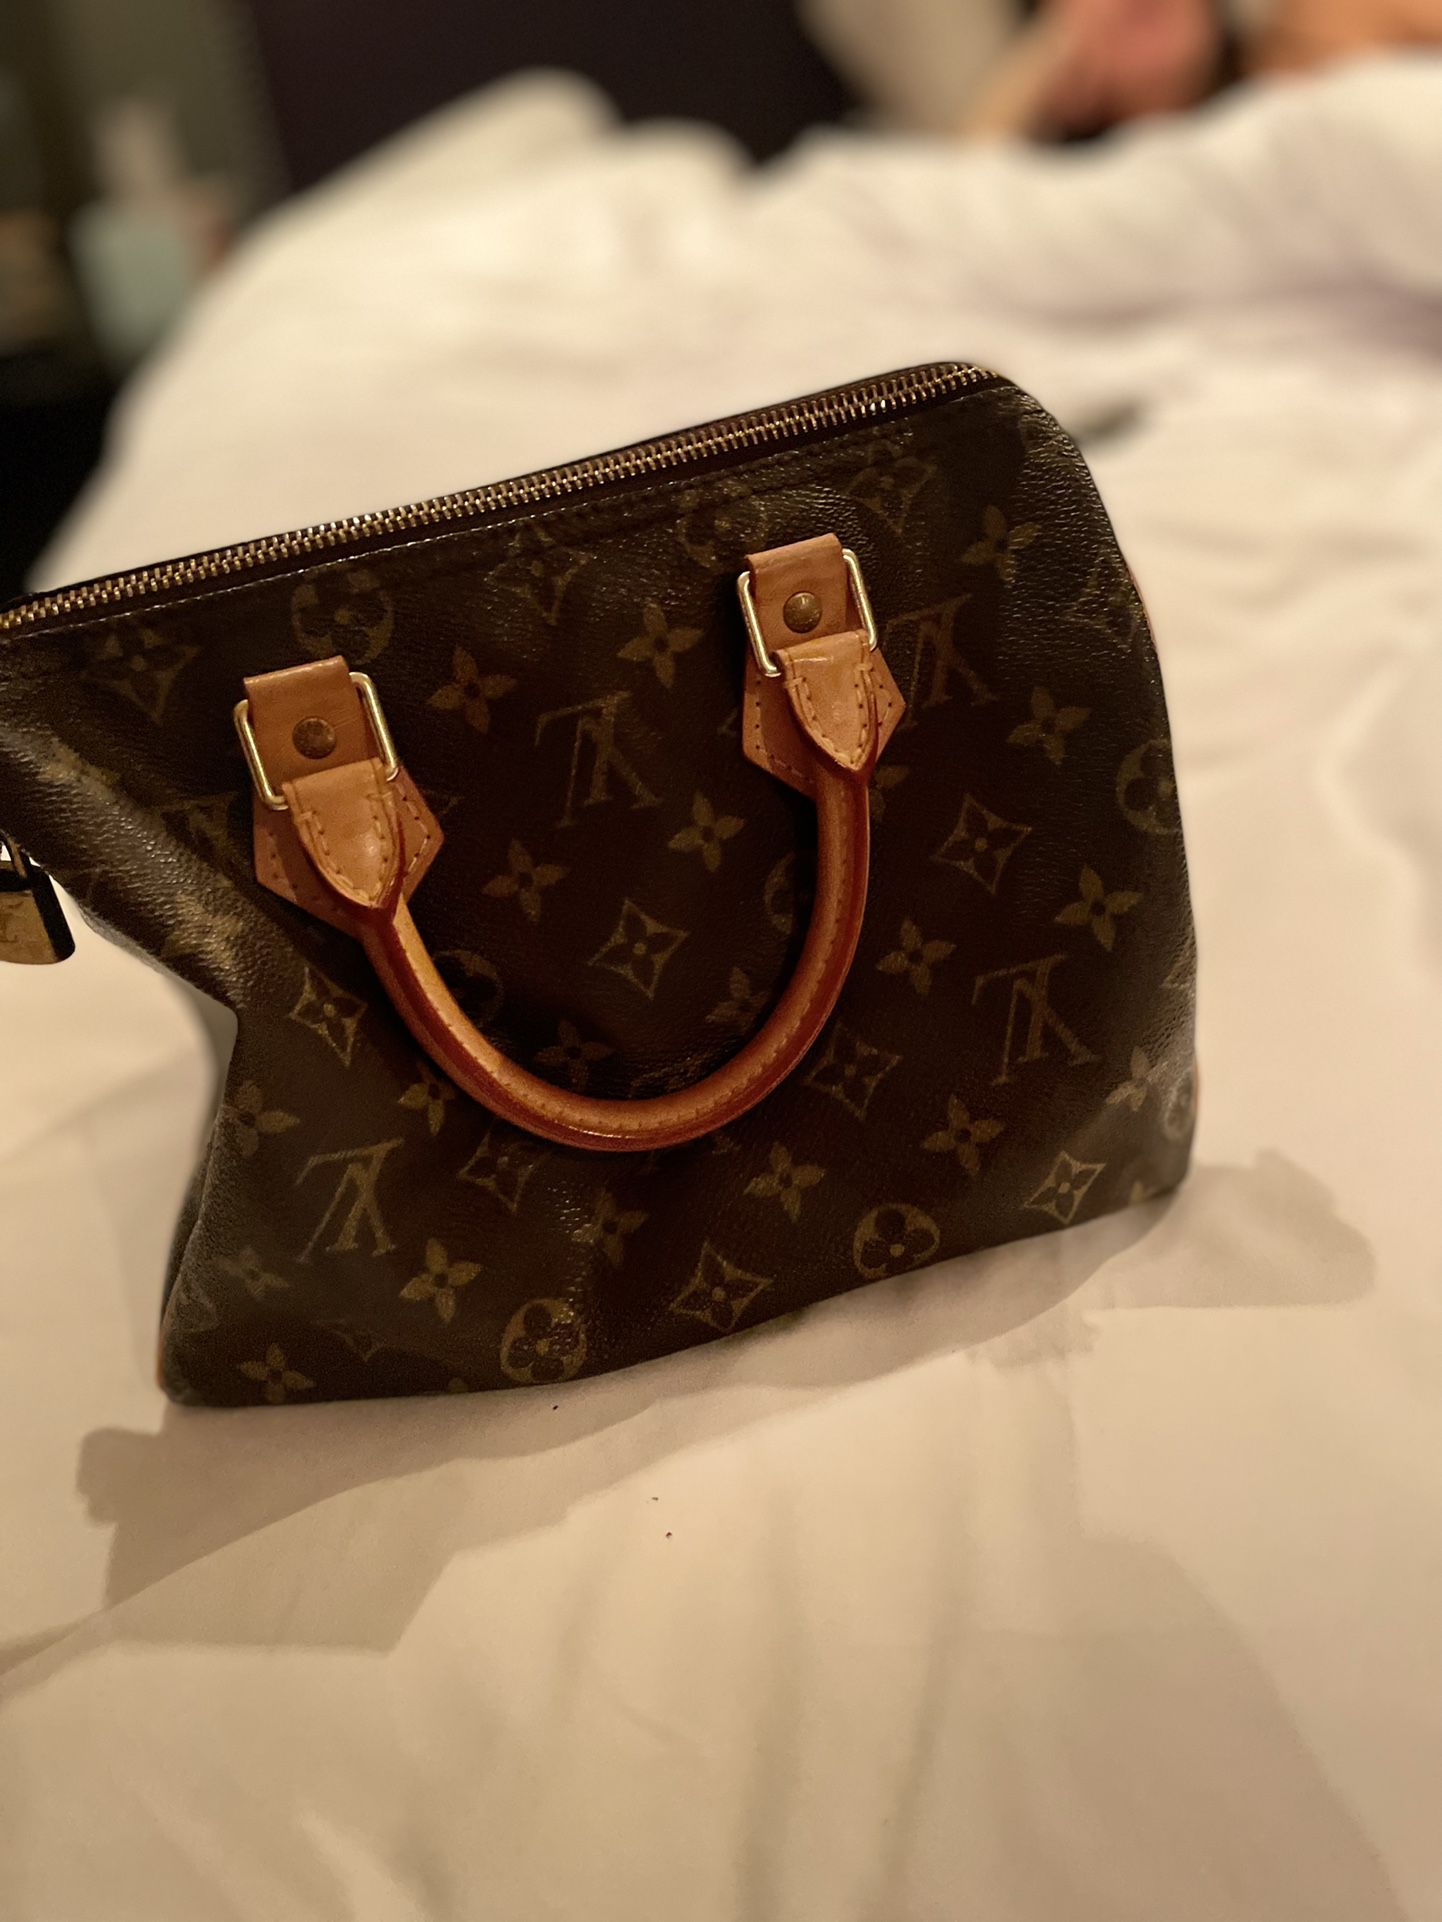 Luis Vuitton for Sale in Staten Island, NY - OfferUp